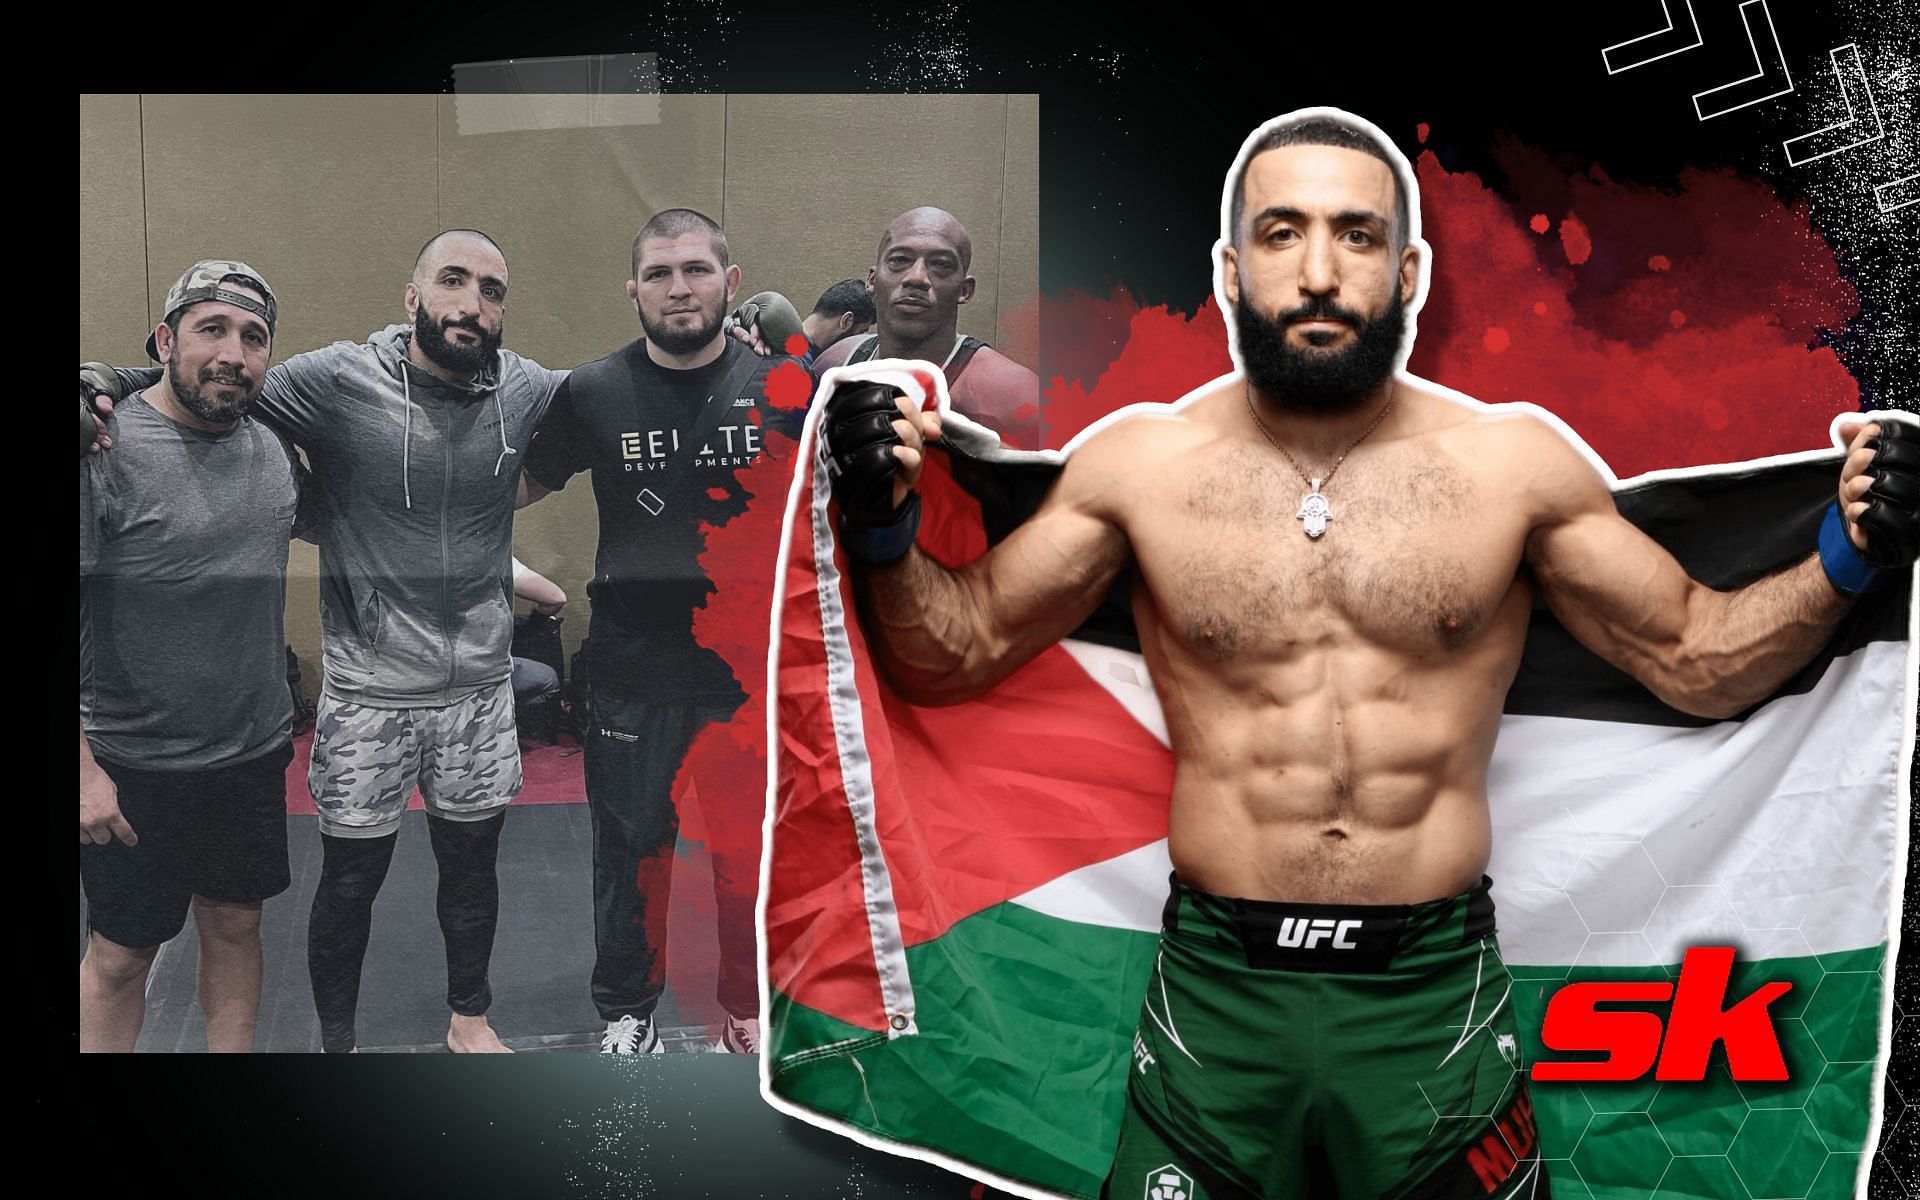 Belal Muhammad describes his training with Team Khabib for the Sean Brady fight